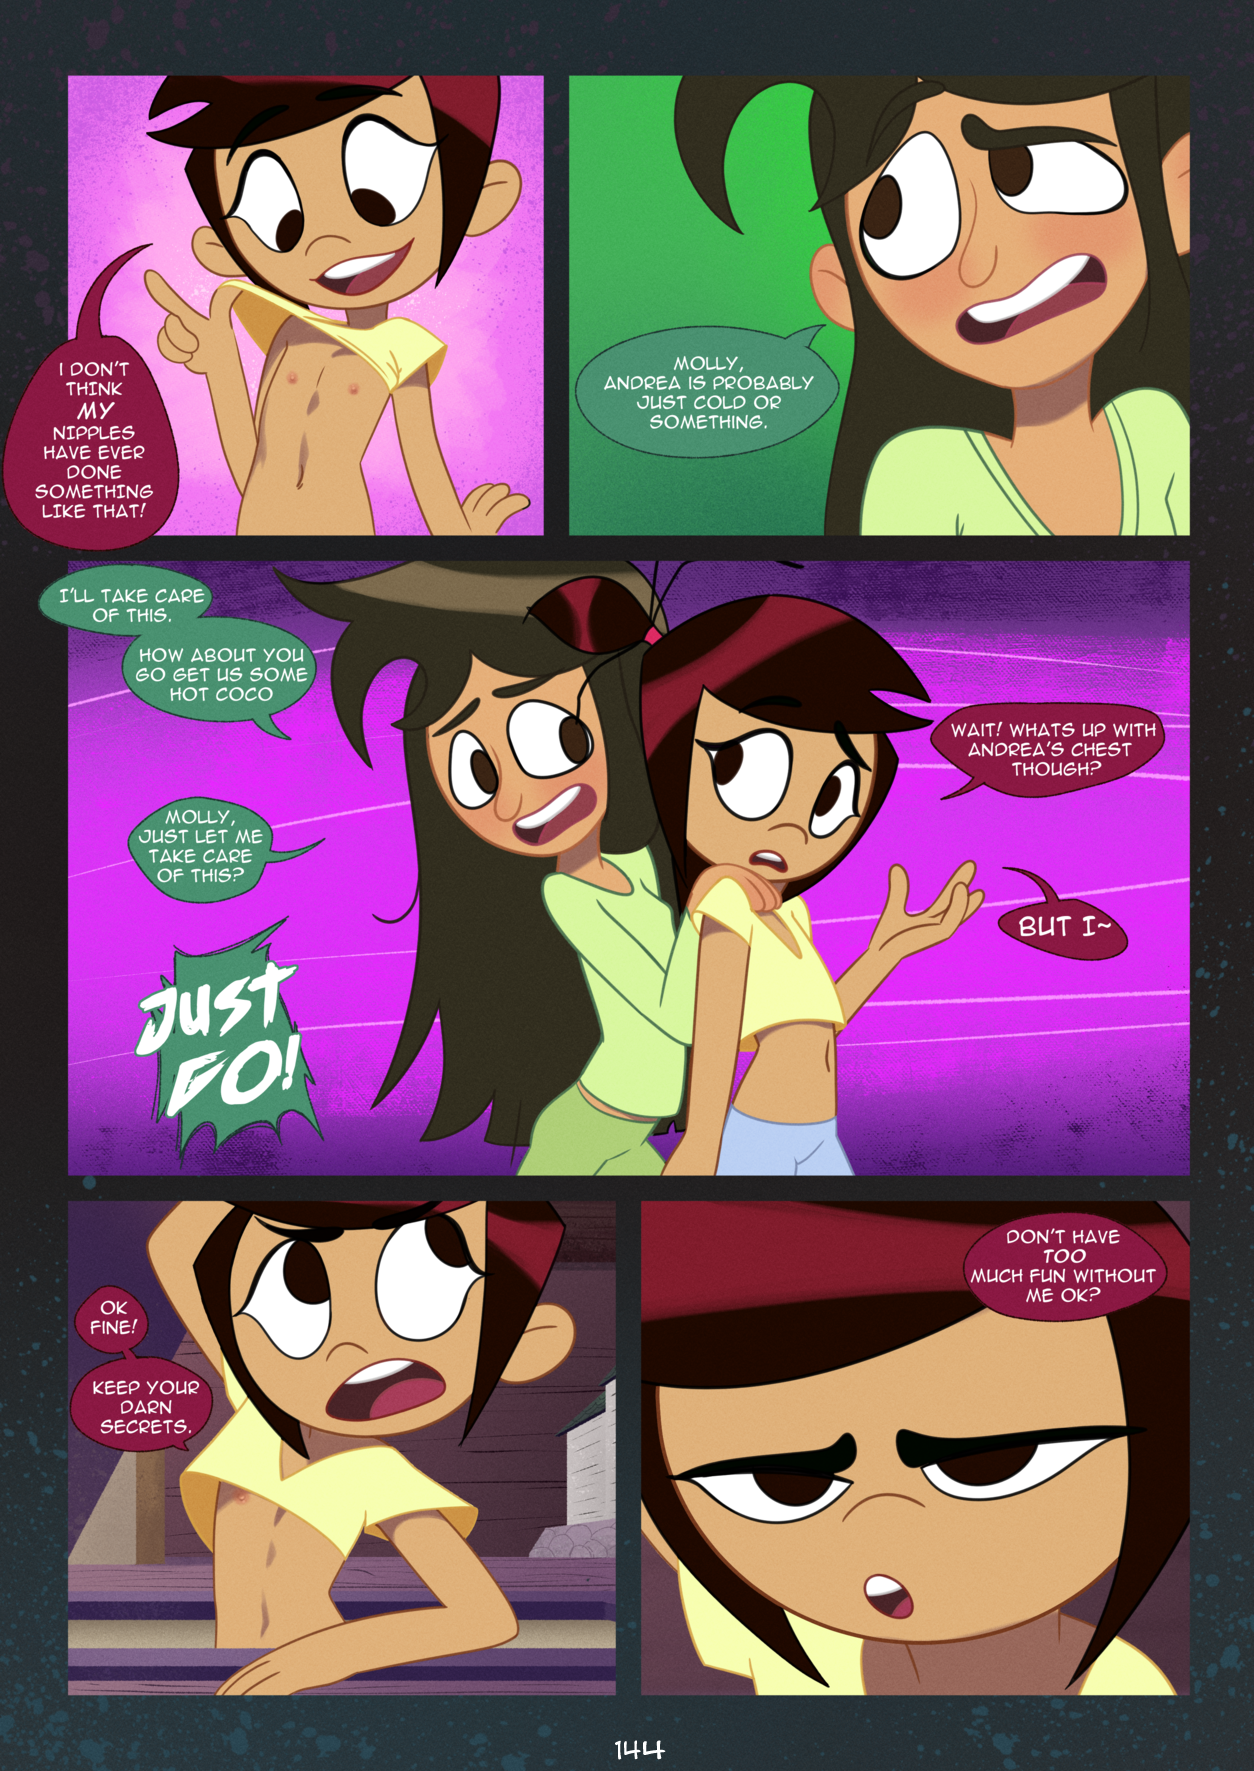 Girls SleepOver - Gone Wrong (Gone Sexual) porn comic picture 6